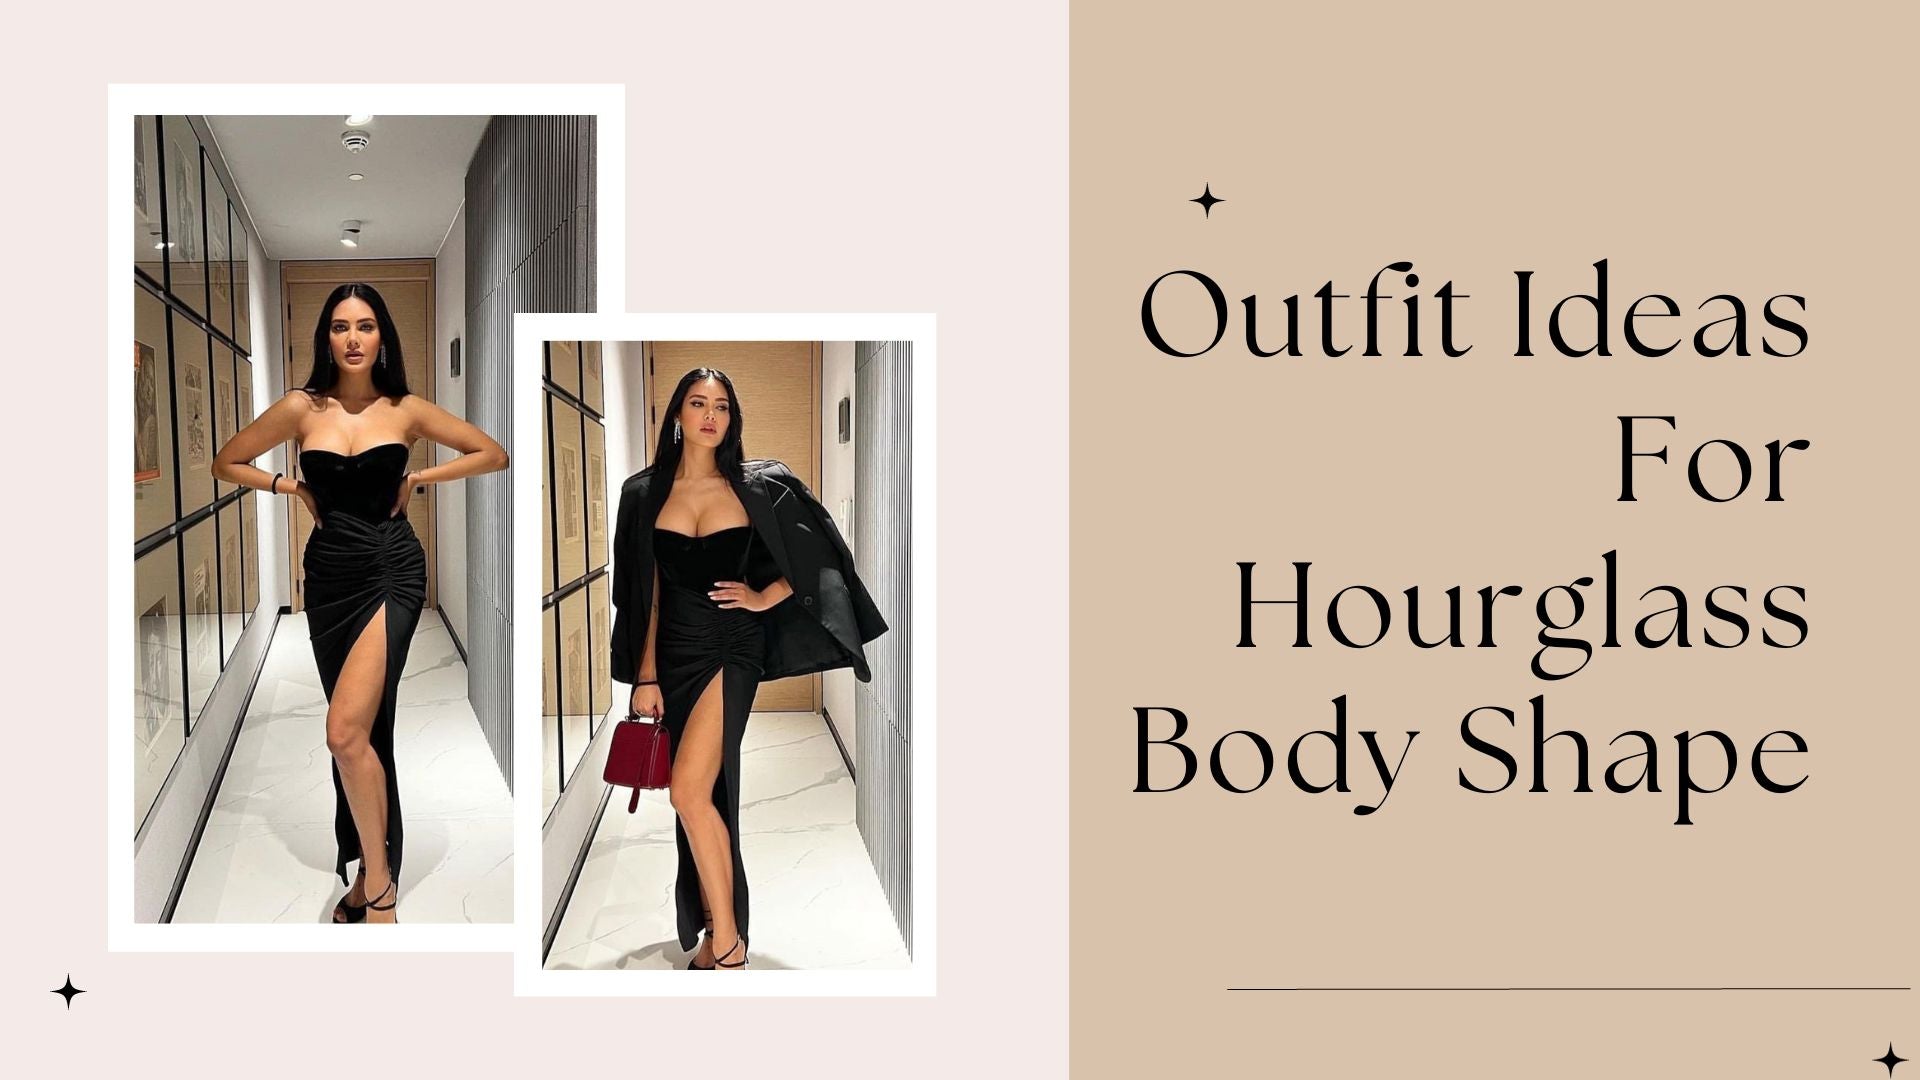 How To Find a Party Dress to Suit Your Body Shape